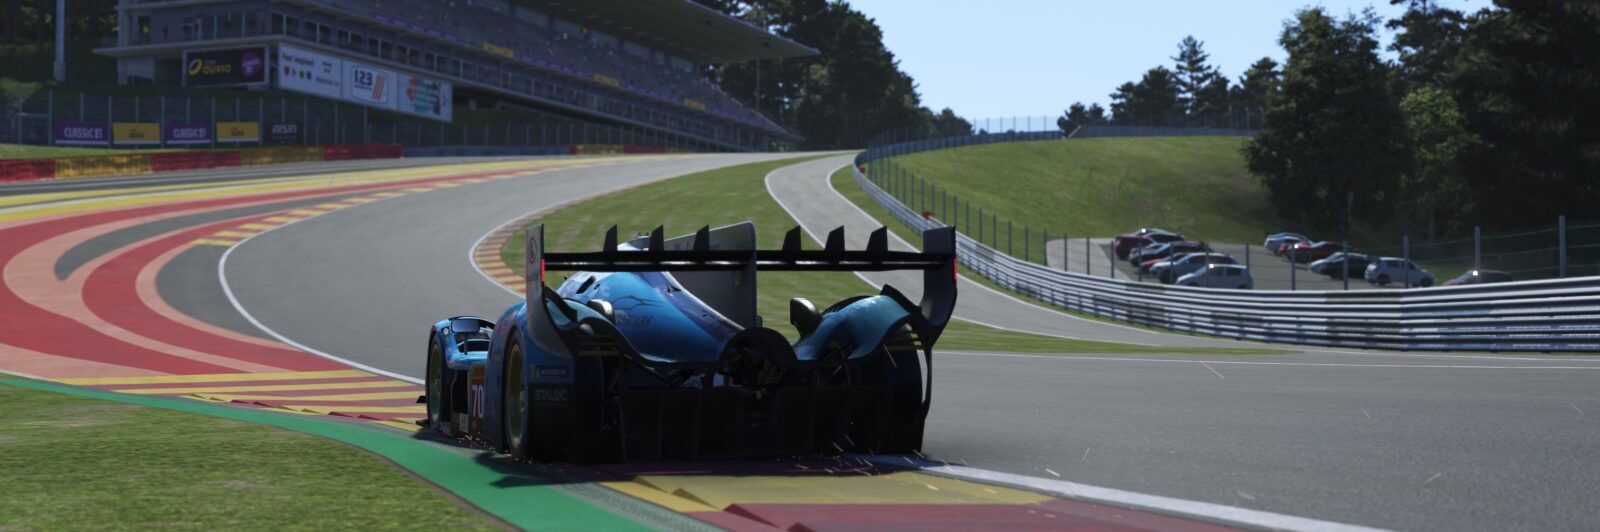 Le Mans Ultimate Track Guide Spa-Francorchamps